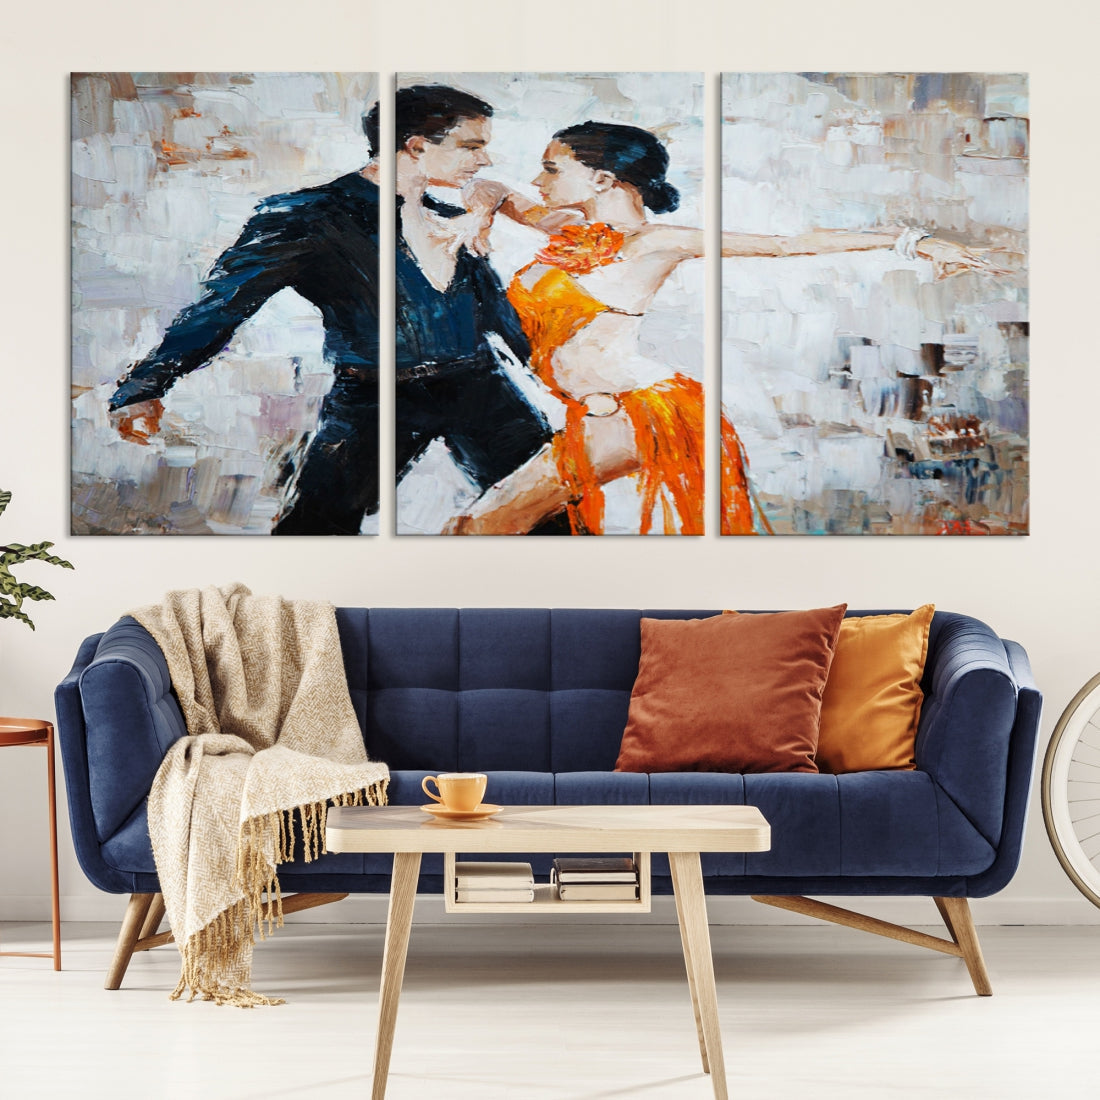 Dancing Couple Oil Painting Modern Large Wall Art Canvas Print